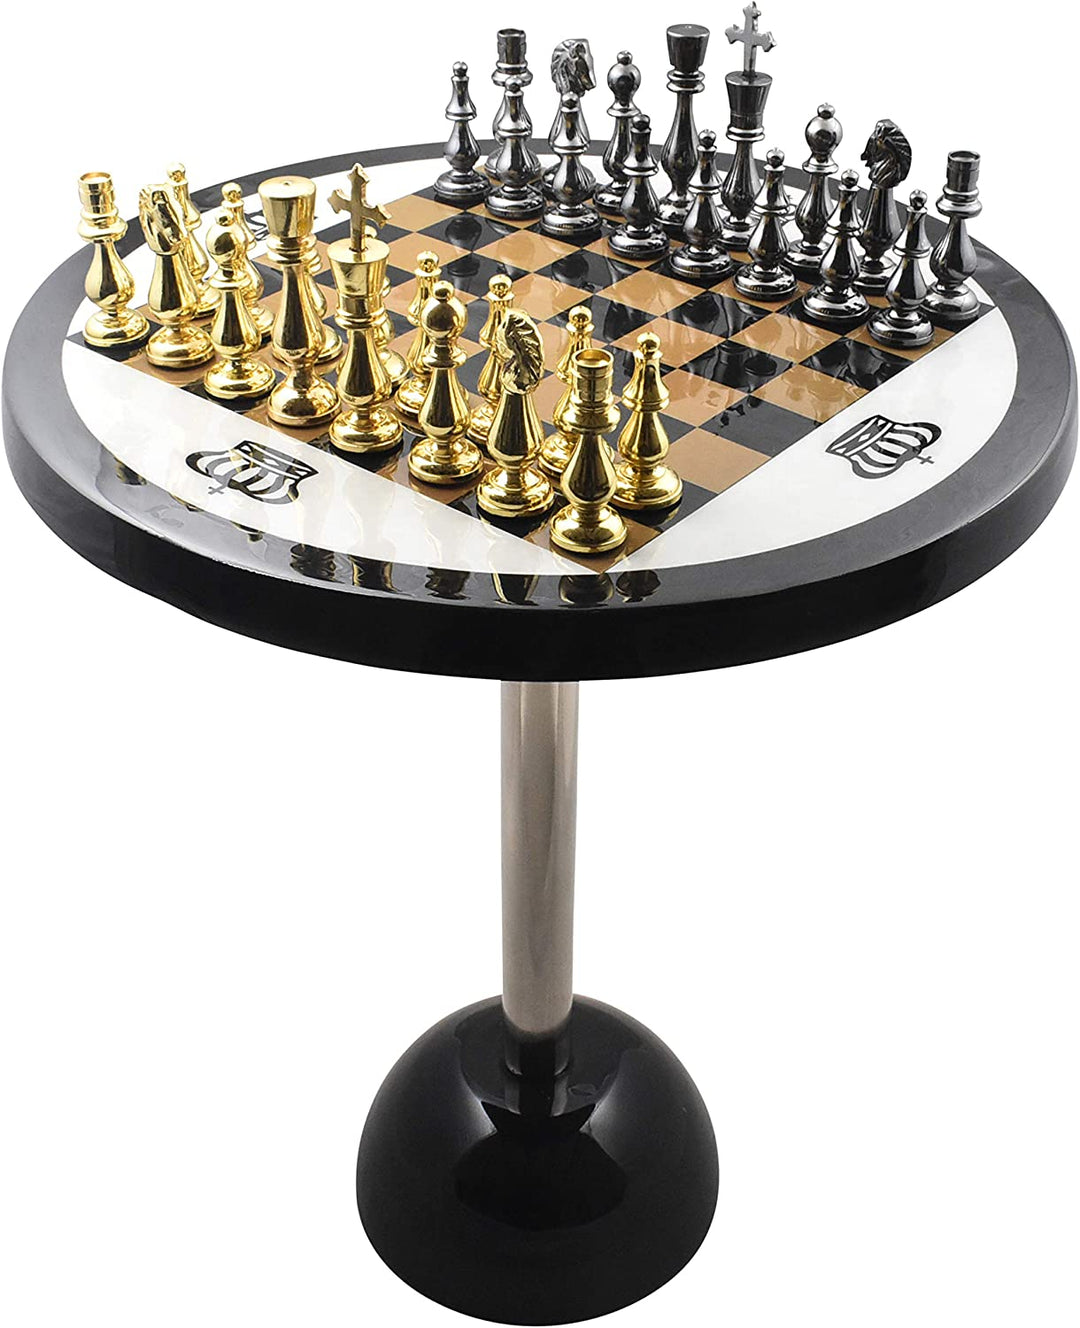 Collectibles Brass Metal Luxury Chess Pieces Board Game with Table Set- 21" Tall